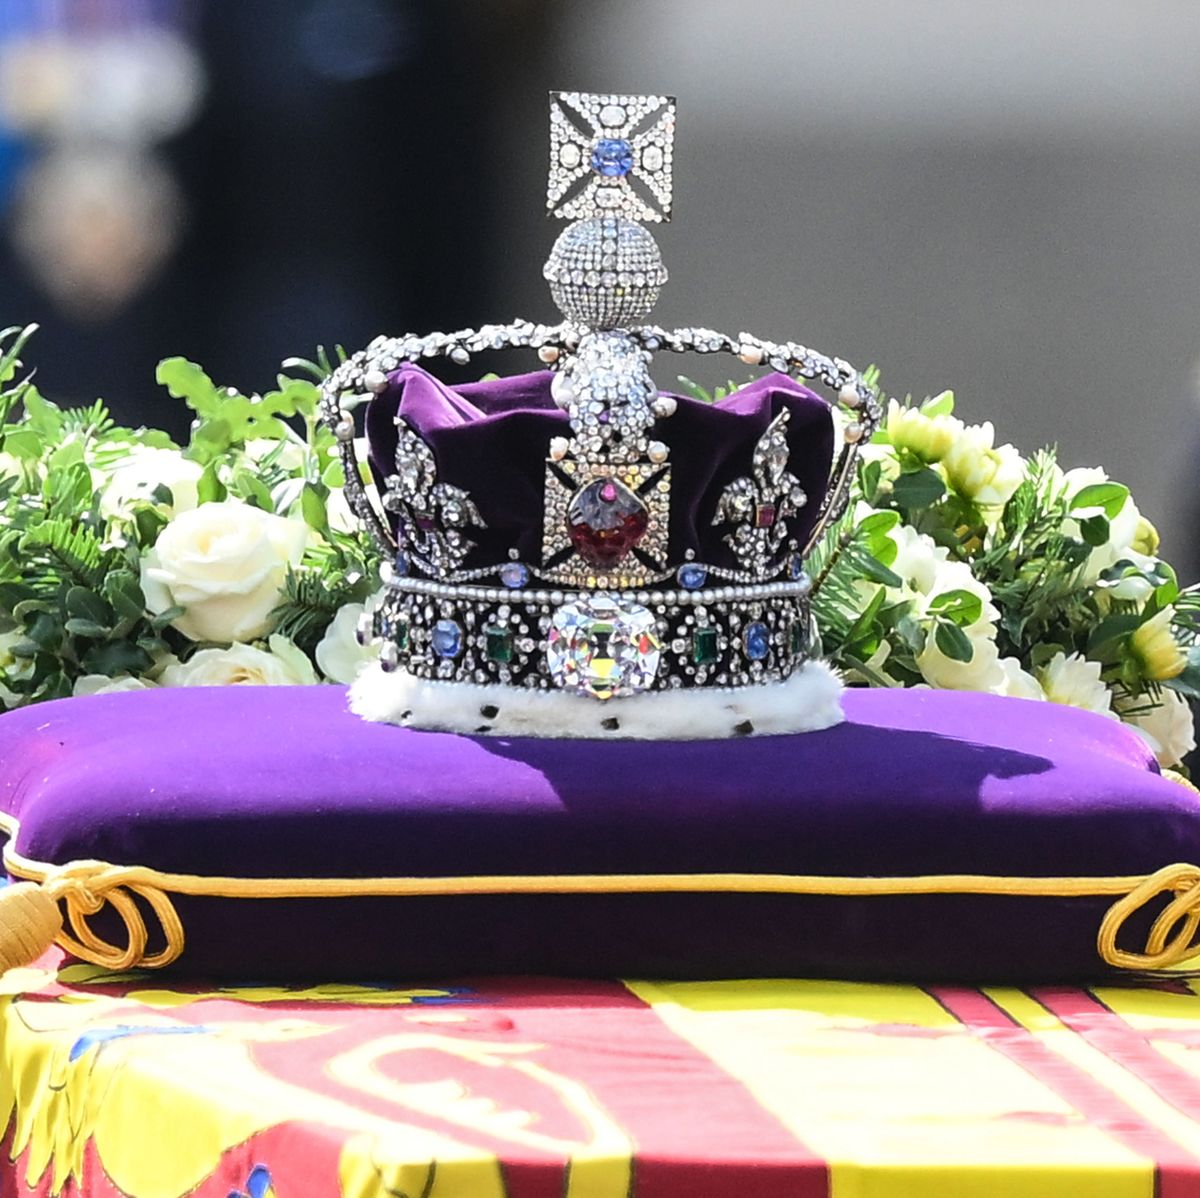 https://hips.hearstapps.com/hmg-prod/images/the-gun-carriage-bearing-the-coffin-of-the-late-queen-news-photo-1663163129.jpg?crop=0.668xw:1.00xh;0.223xw,0&amp;resize=1200:*